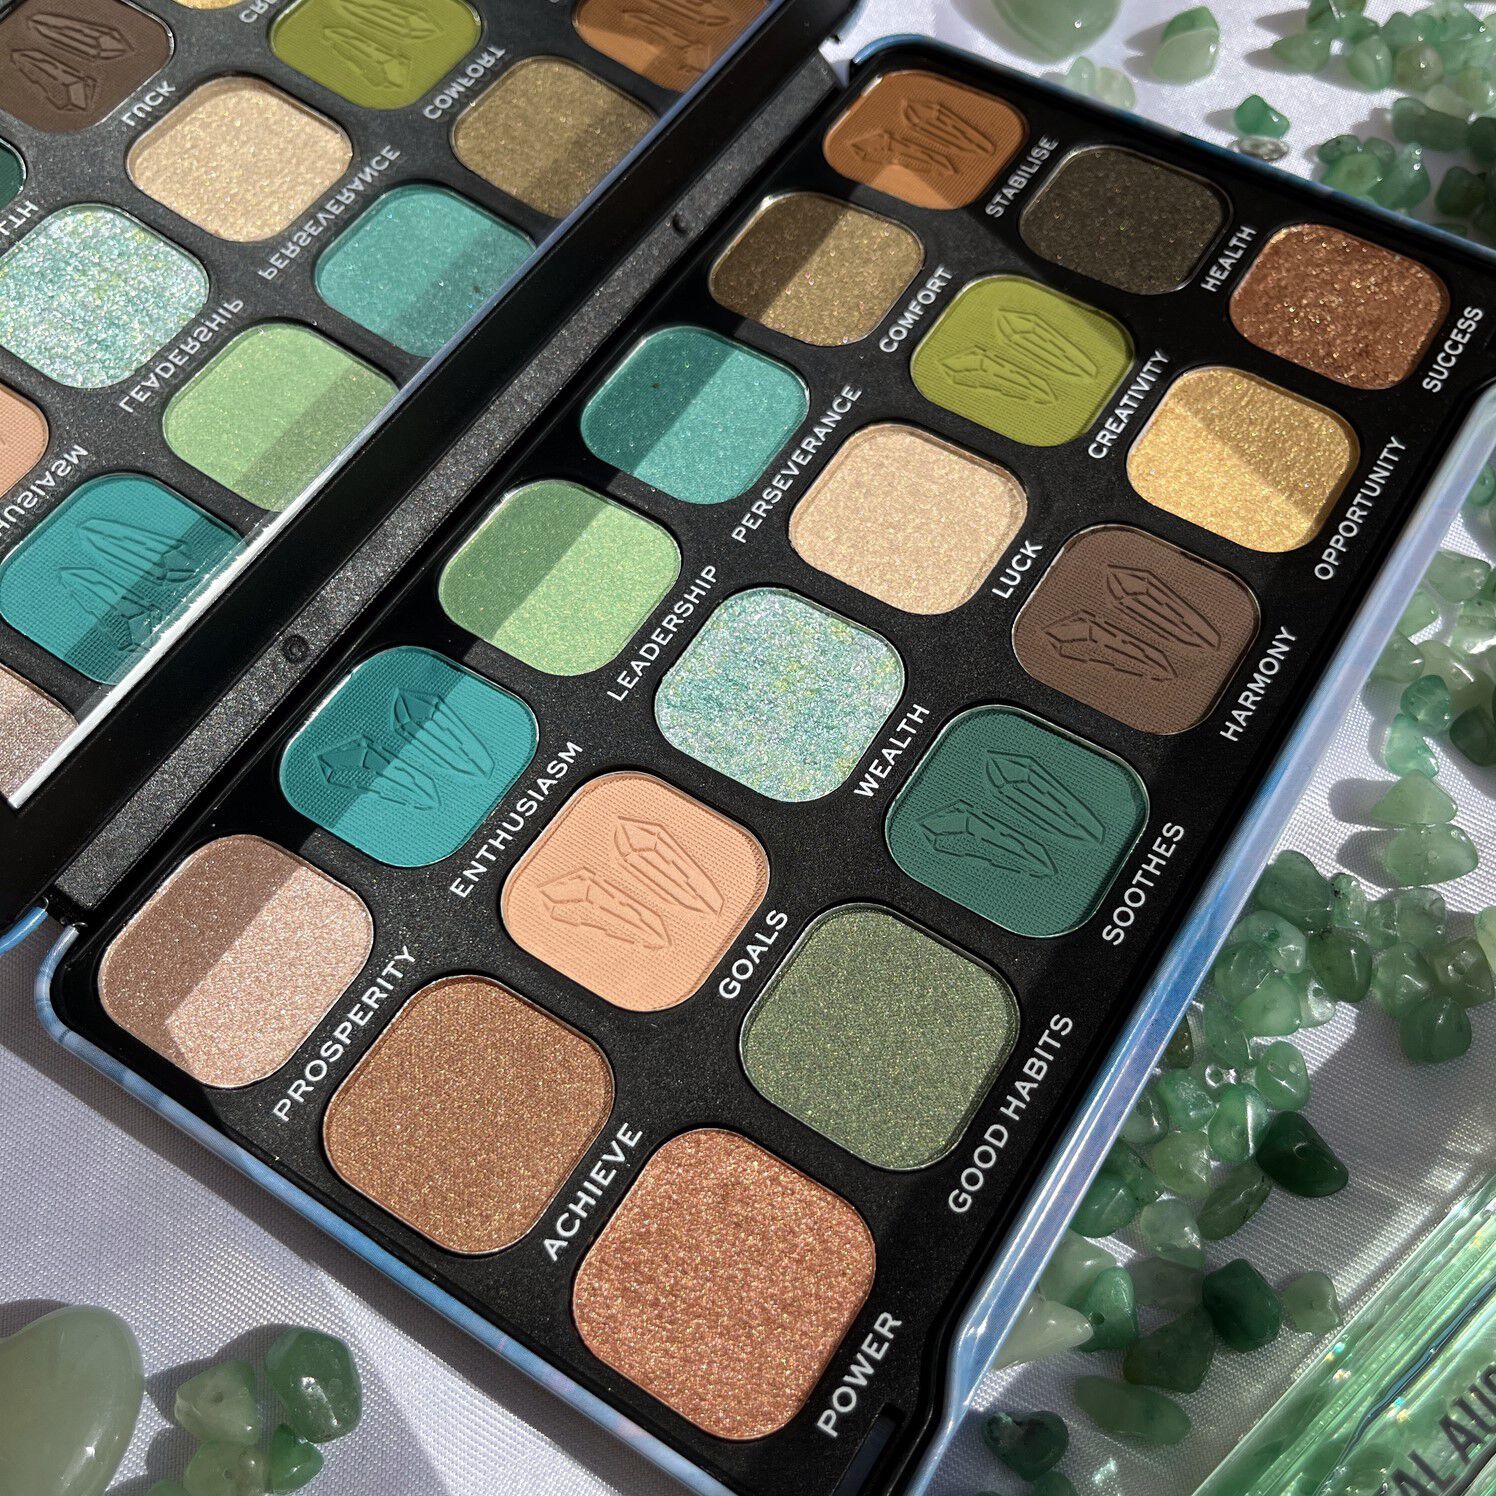 Revolution Crystal Aura Forever Flawless Shadow Palette